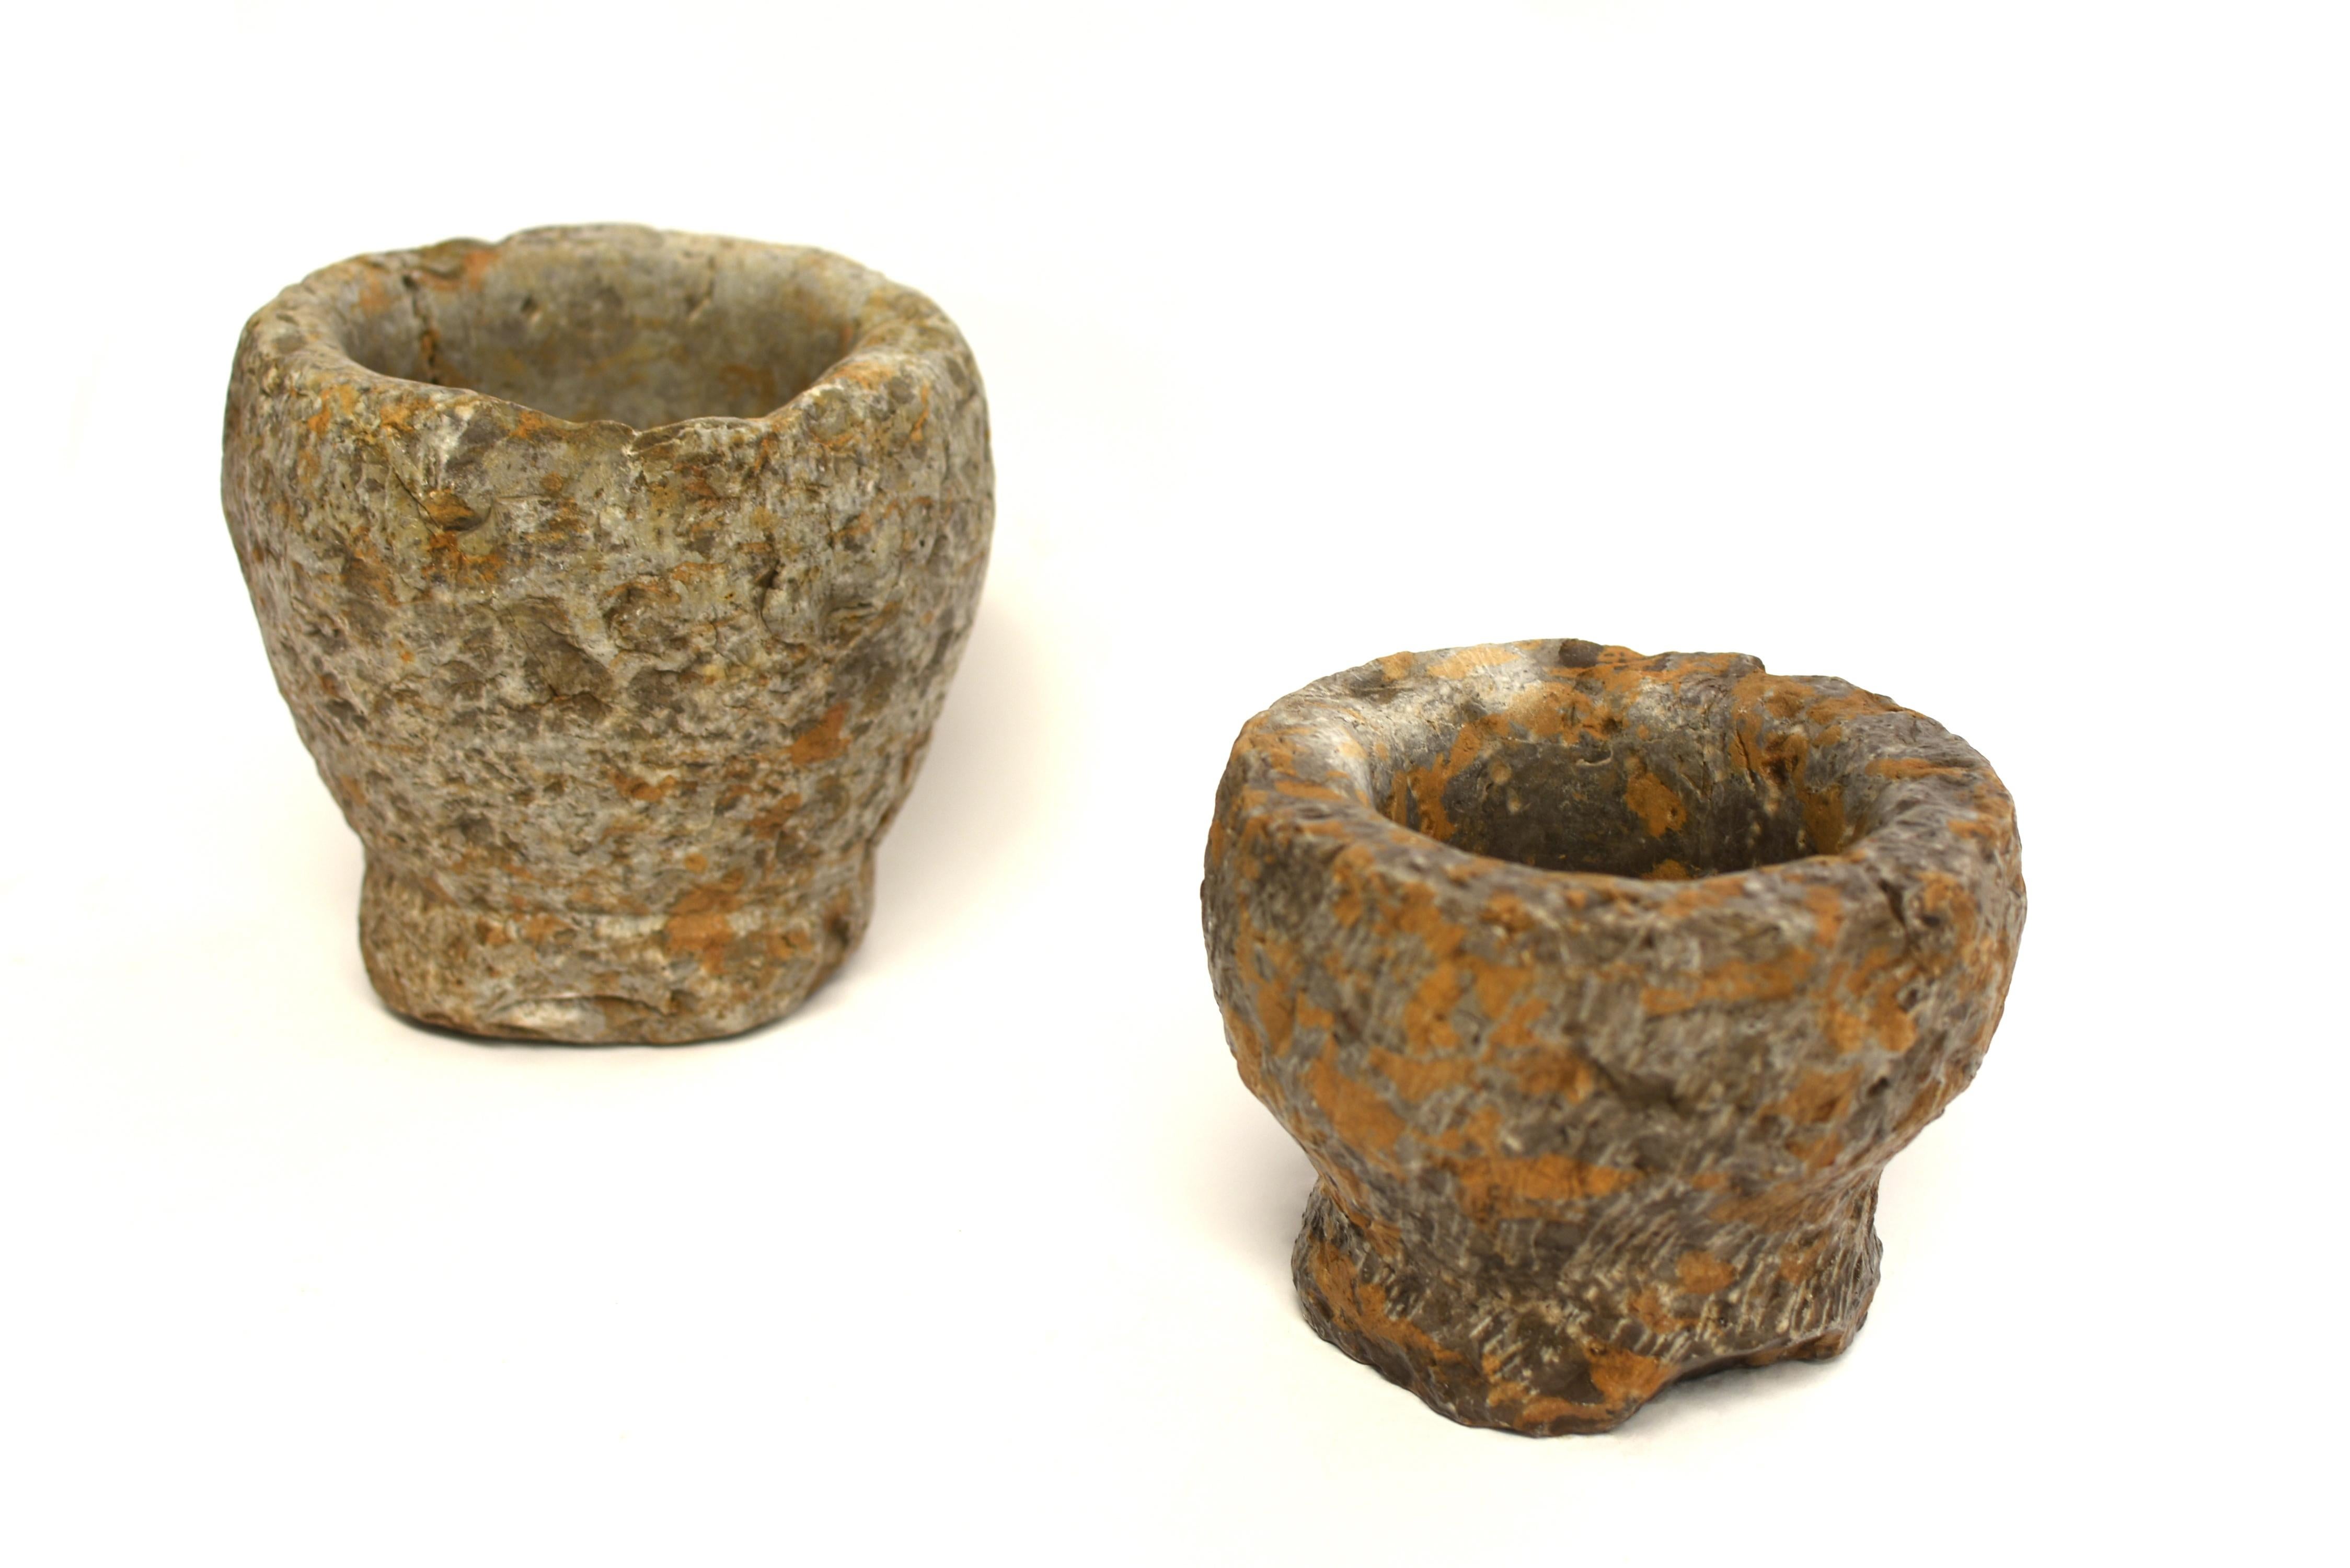 Two antique bowls of granite stone, hand cut and crafted, one in conical form on a round socle, the other hemispherical with a waisted base. The larger bowl with original hand chiseled divots, the smaller one with carved lines resembling wind blown